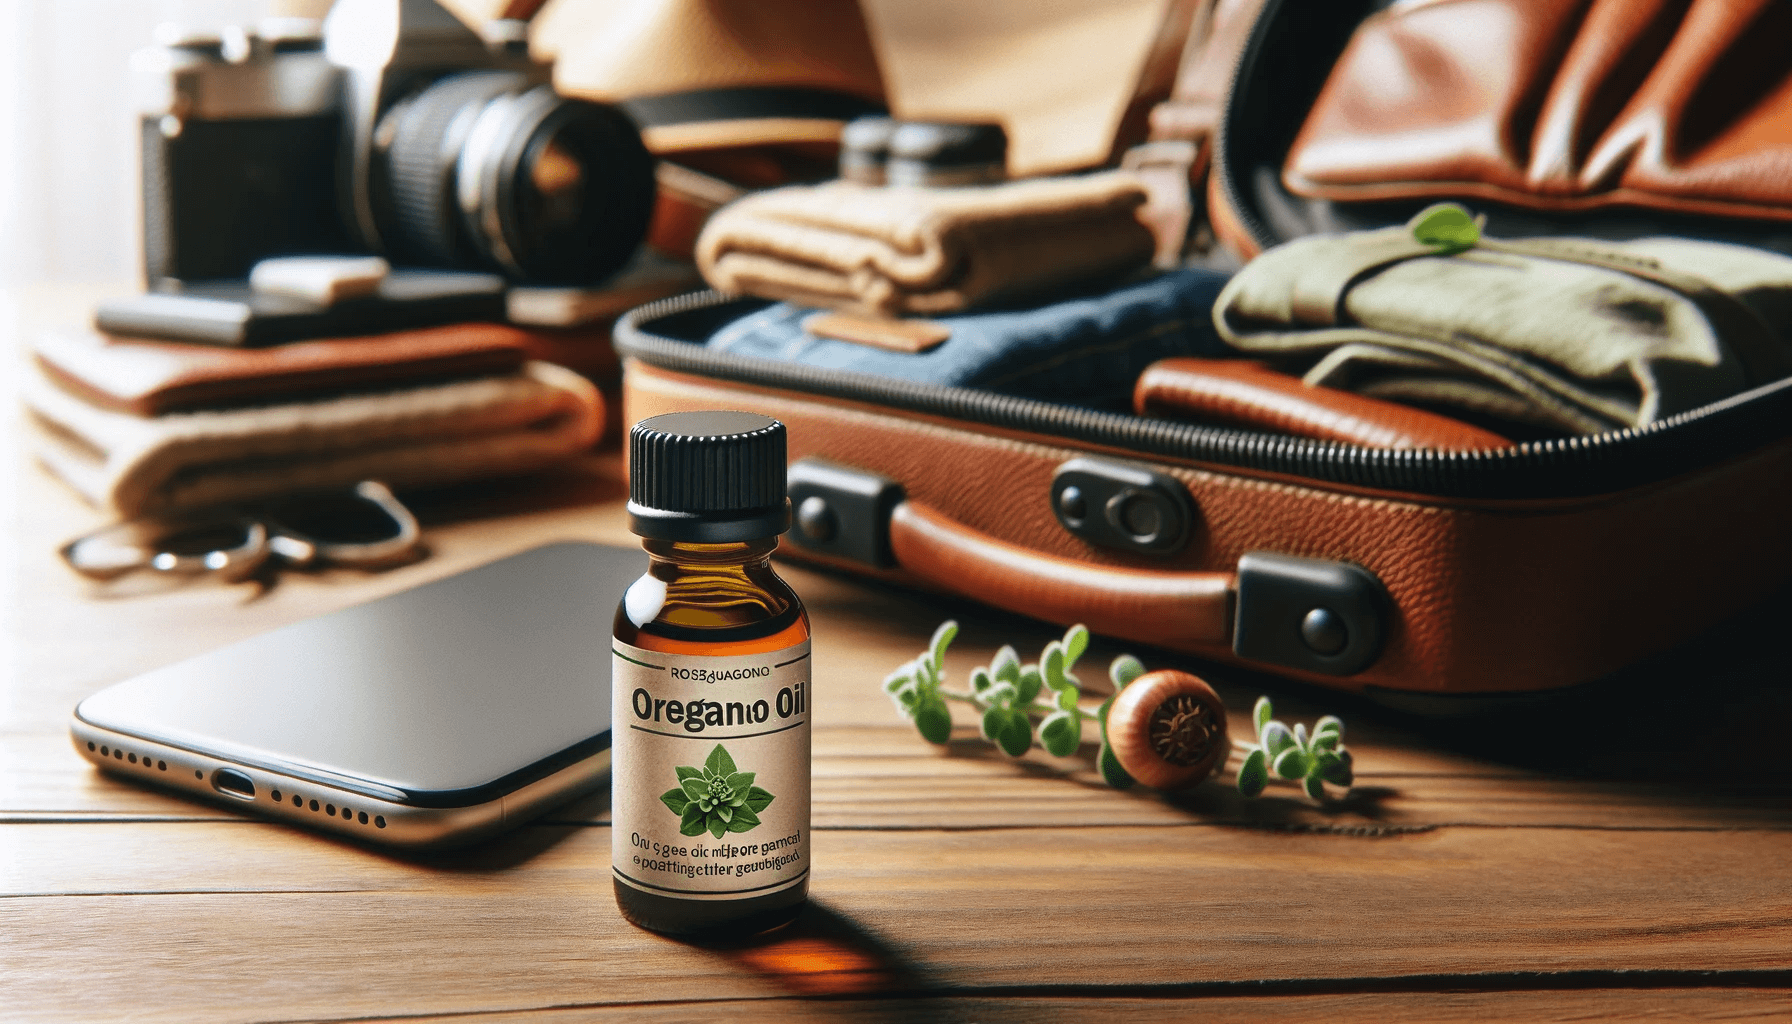 Oregano oil bottle with a focus on being perfect for on-the-go wellness needs, providing convenience and health benefits.